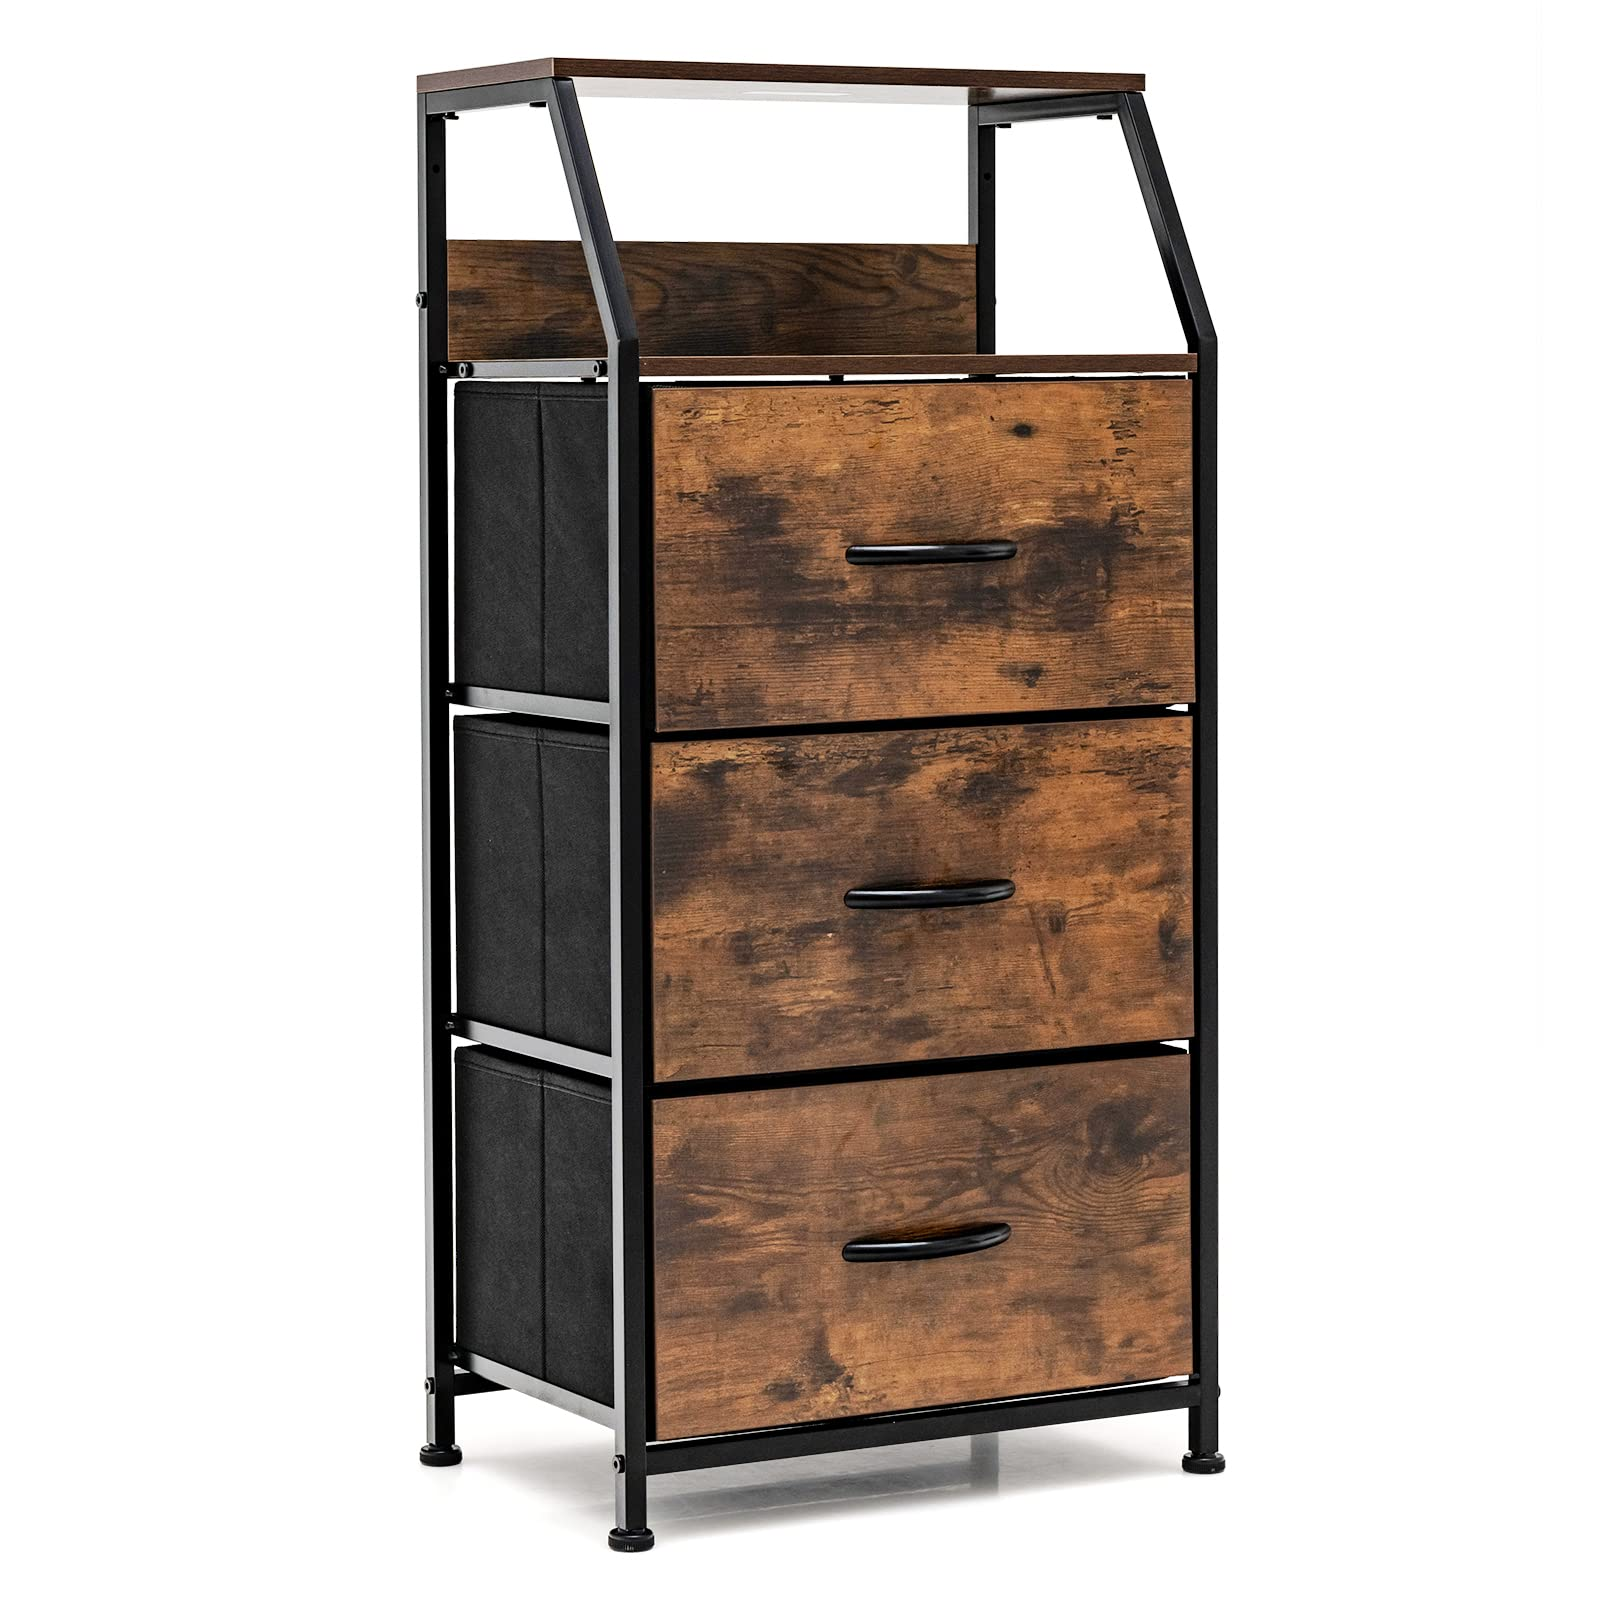 Giantex 3 Drawers Dresser, Storage Tower w/ 3 Foldable Fabric Drawers & Open Shelves